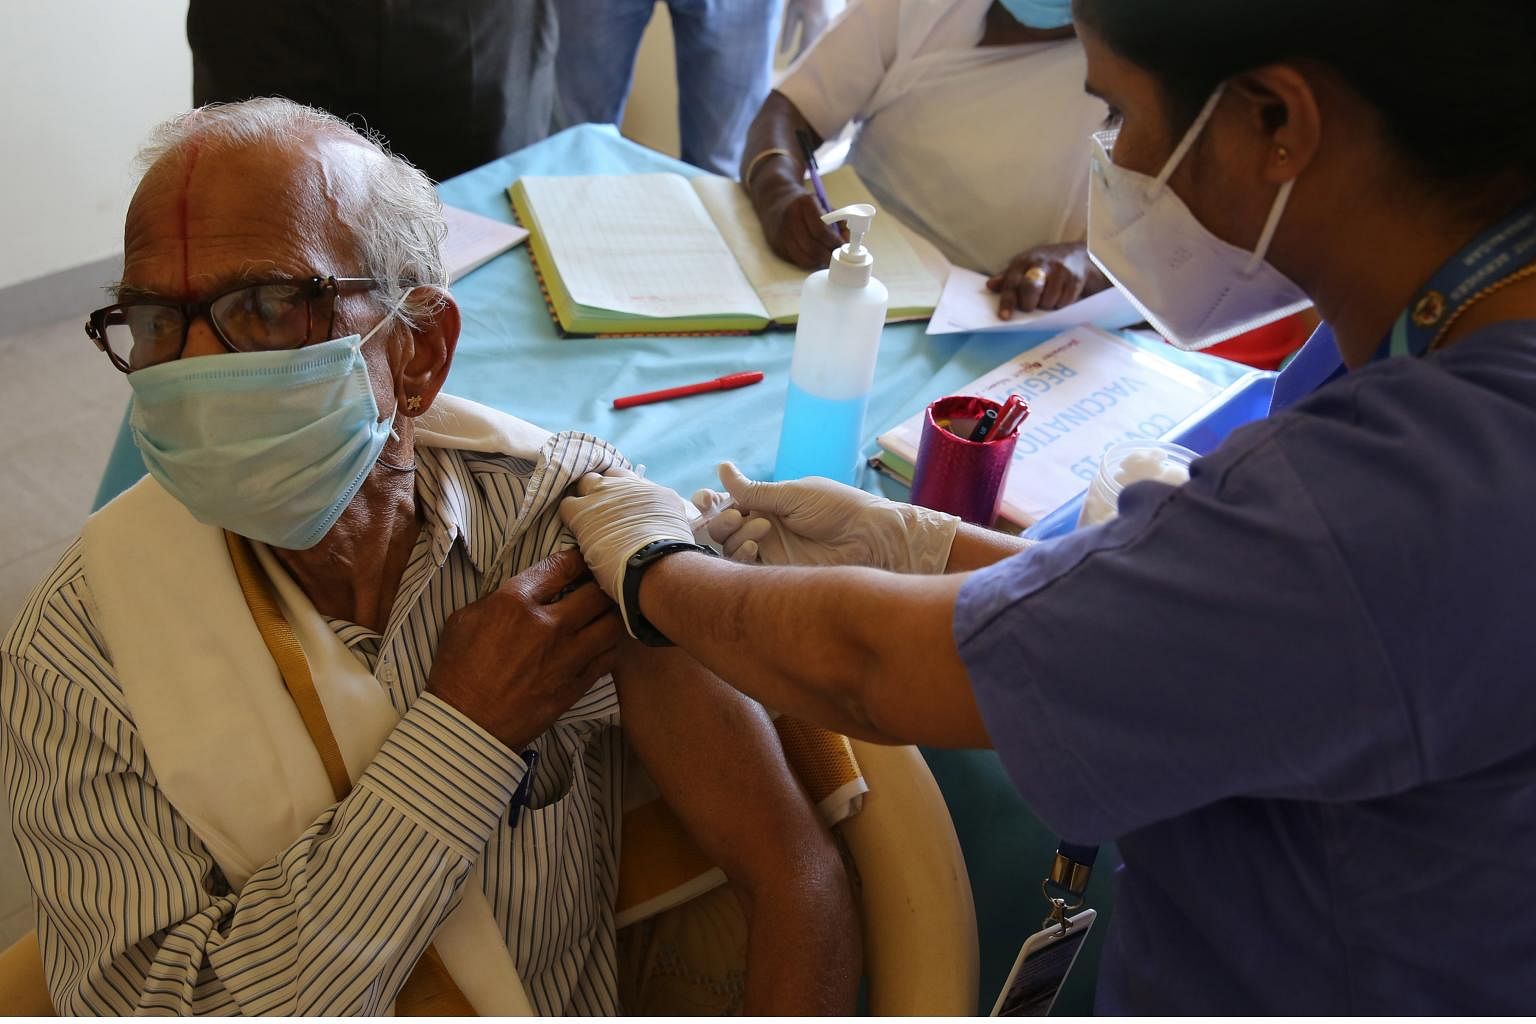 India&#39;s Covid-19 vaccination for senior citizens launches to relief and confusion, South Asia News &amp; Top Stories - The Straits Times